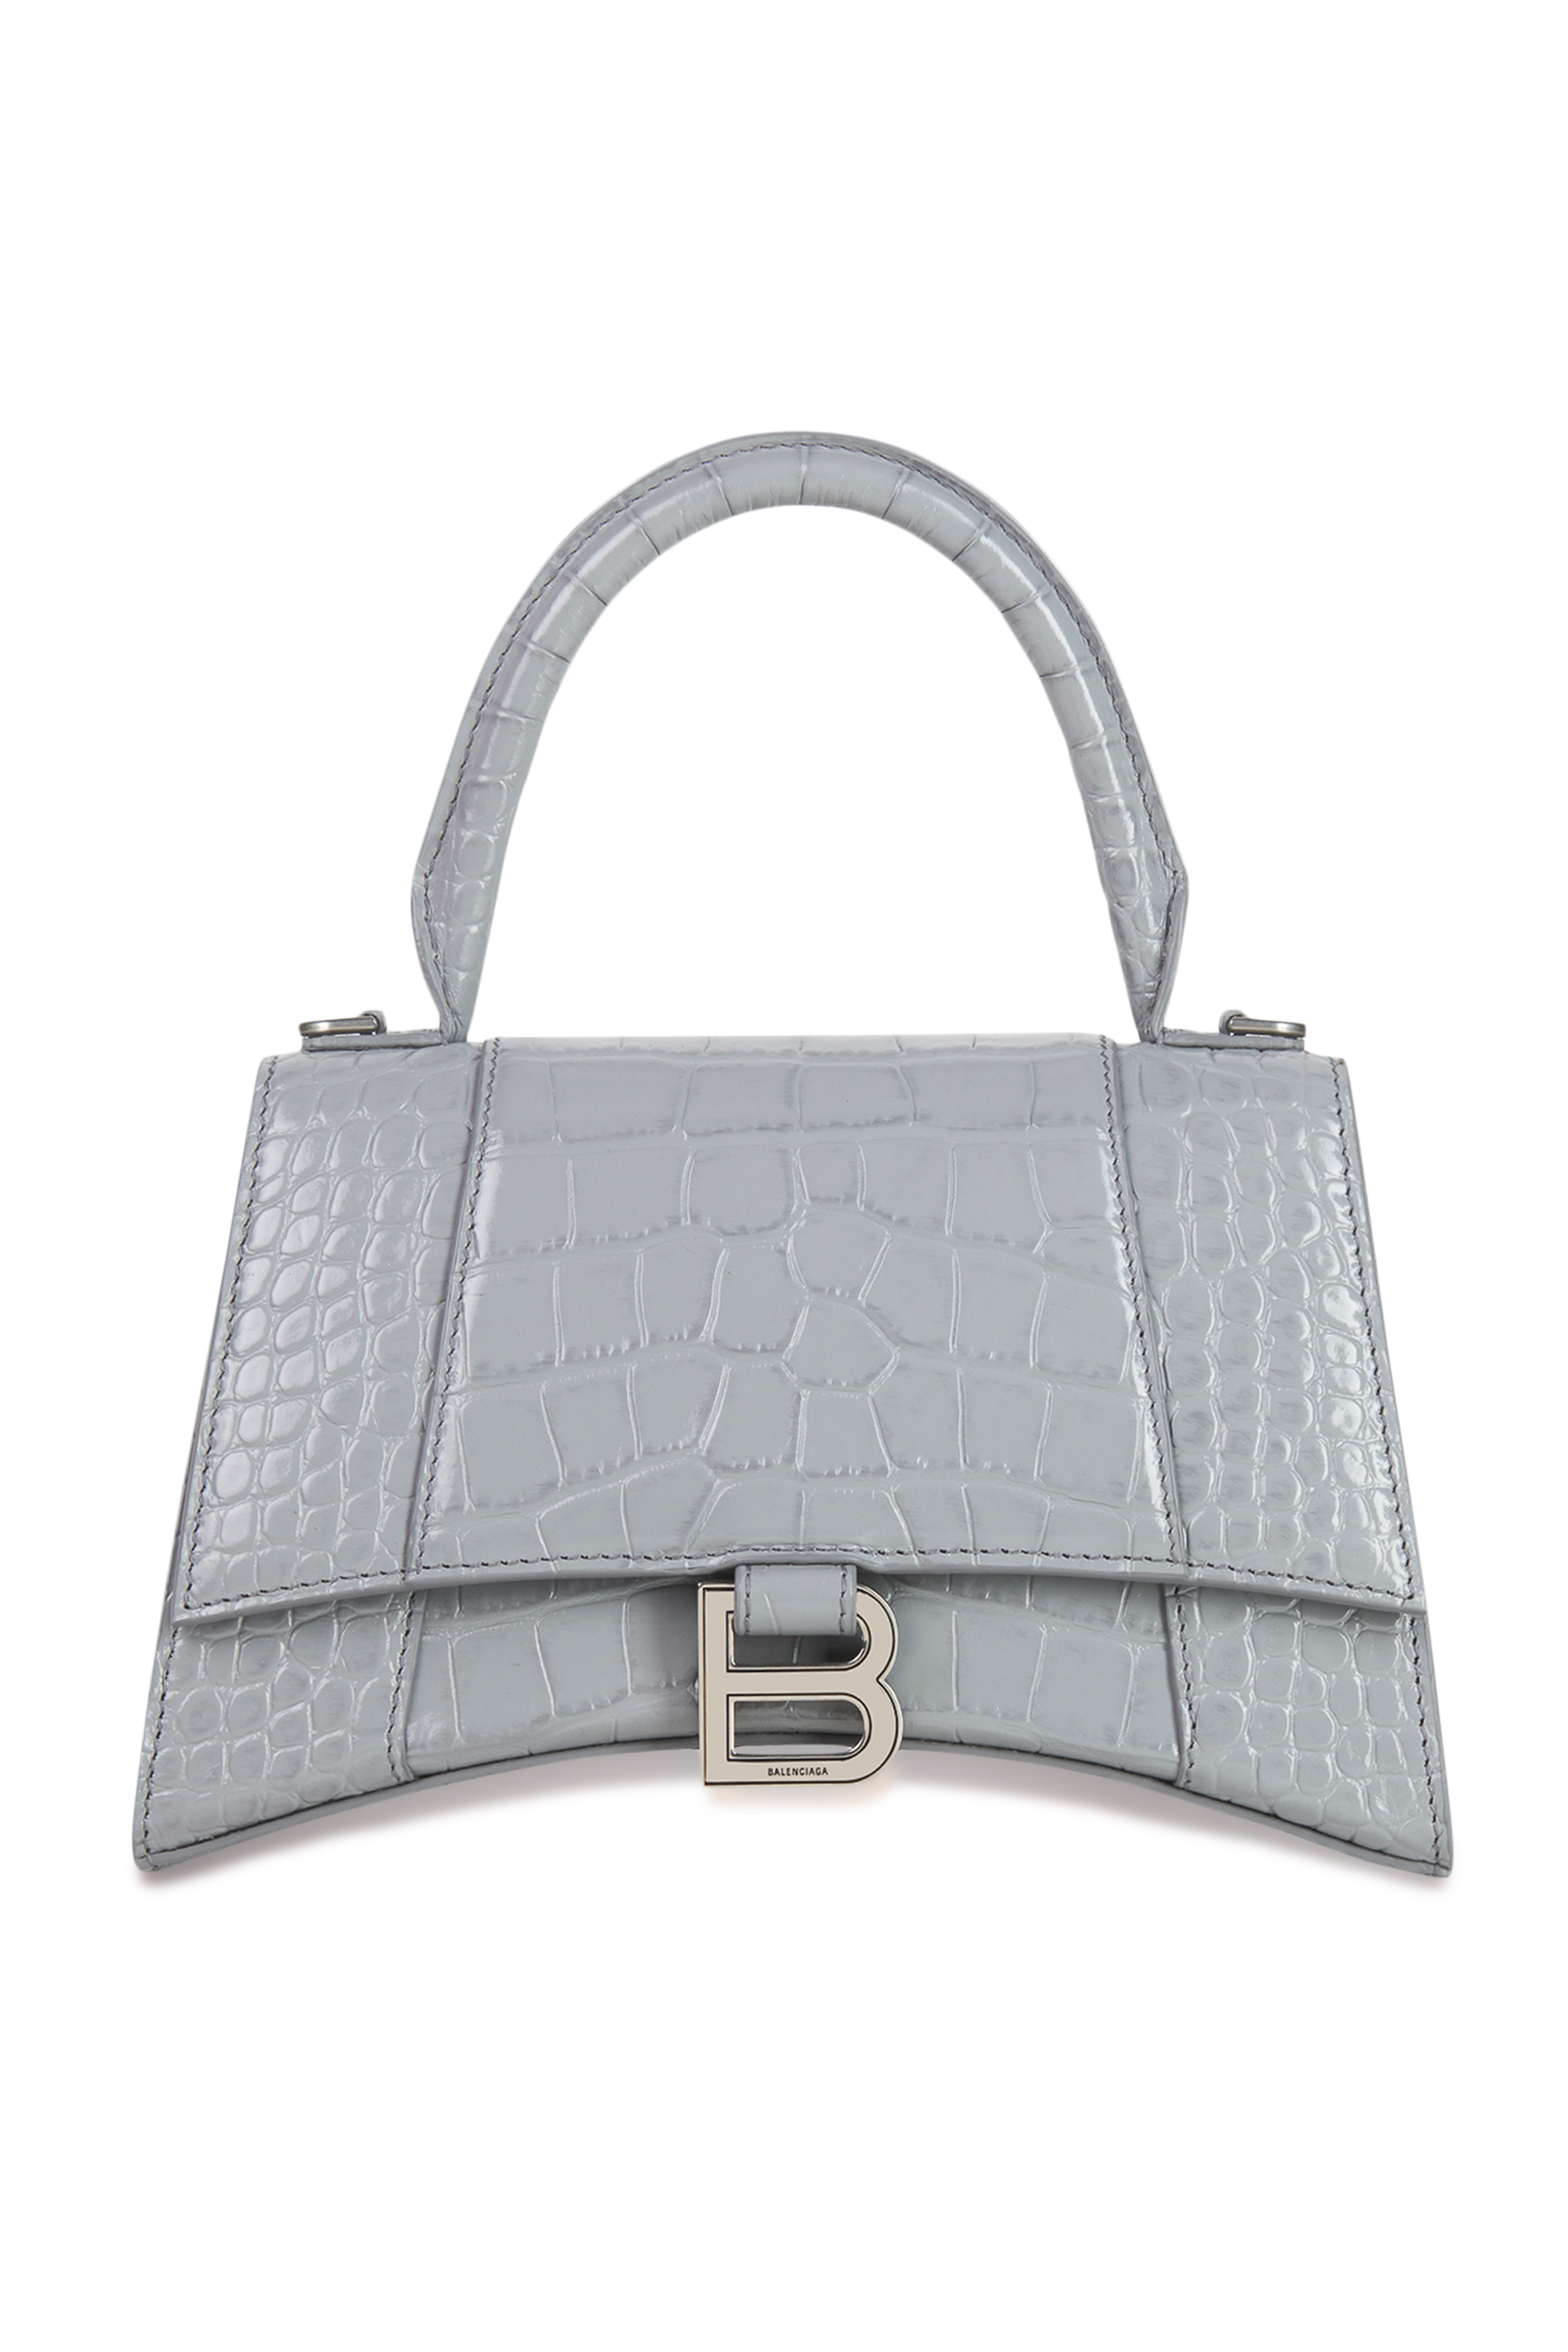 Buy Grey Balenciaga Hourglass Small Top Handle Bag - Womens for AED 7250.00 Tote Bags ...